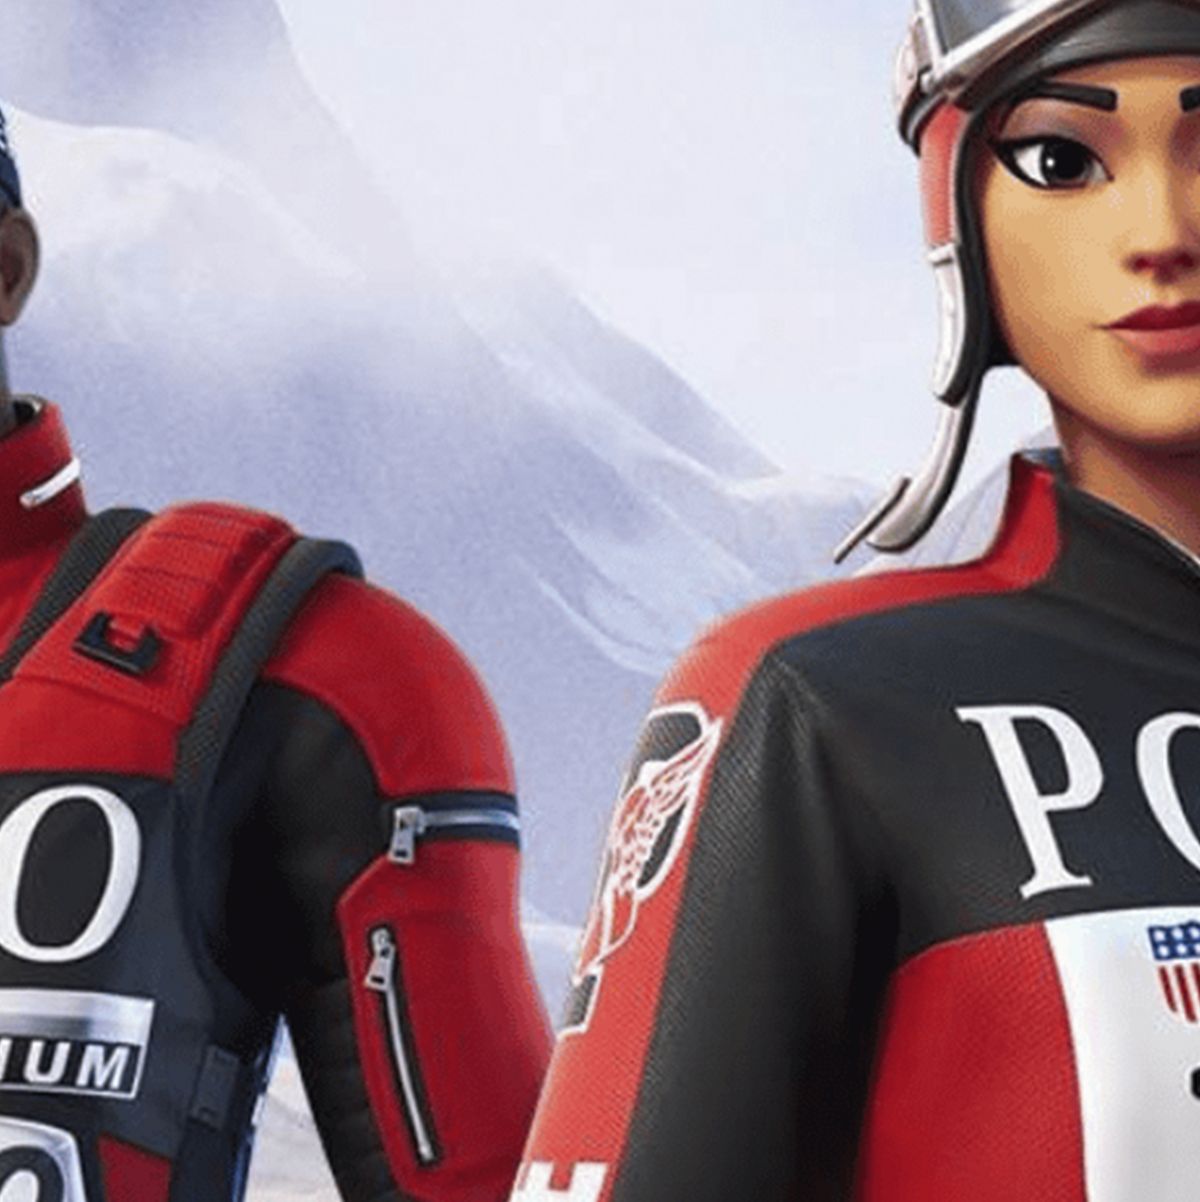 Ralph Lauren designed a new logo to win over Fortnite players